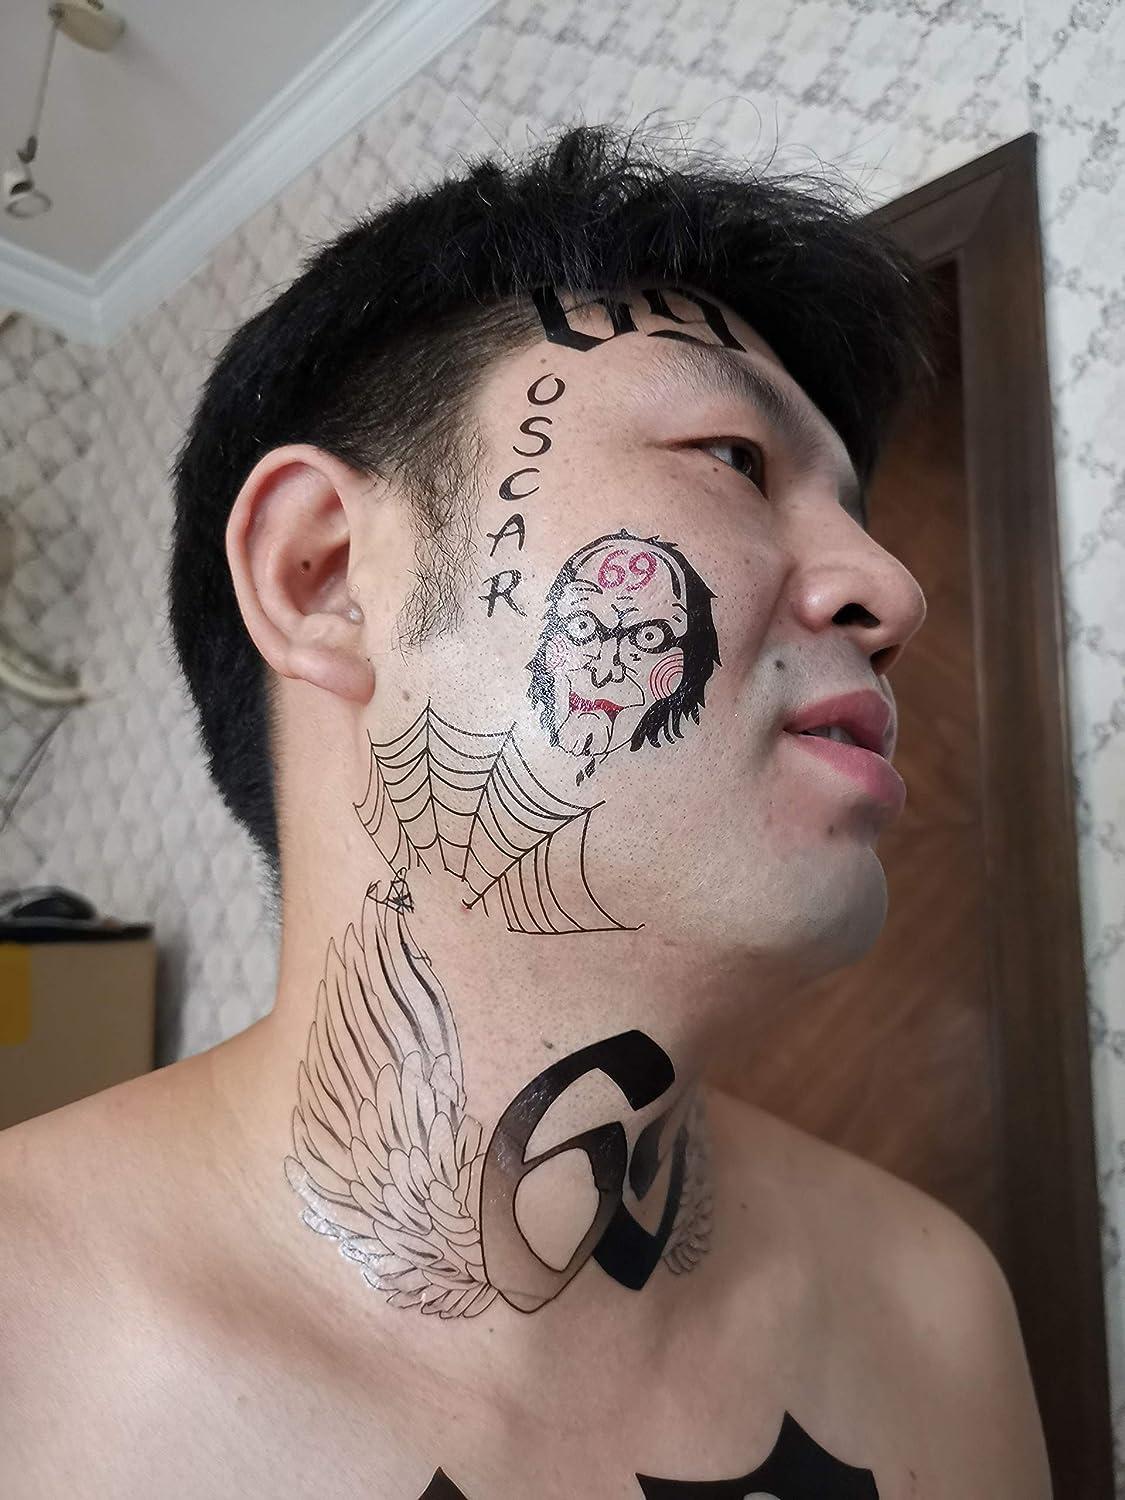 55 Worst Face Tattoos Ever! Jaw-Dropping! | Real tattoo, Face tattoos, Bad face  tattoos